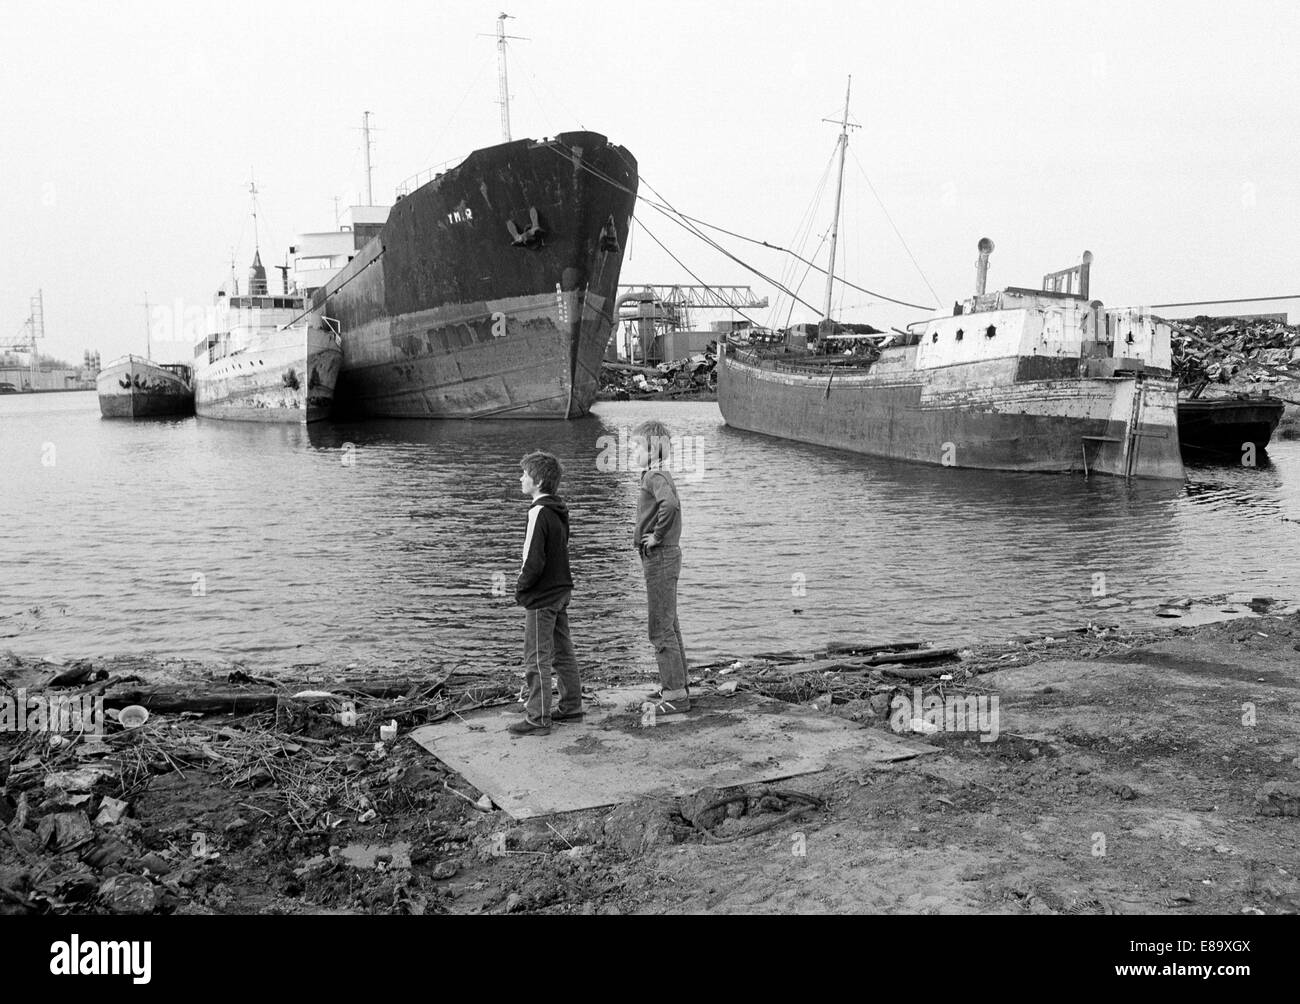 Eighties, D-Leer (Ostfriesland), Ems, Leda, East Frisia, Lower Saxony, harbour, seaport, shipyard, cargo ships, two boys at the banks Stock Photo